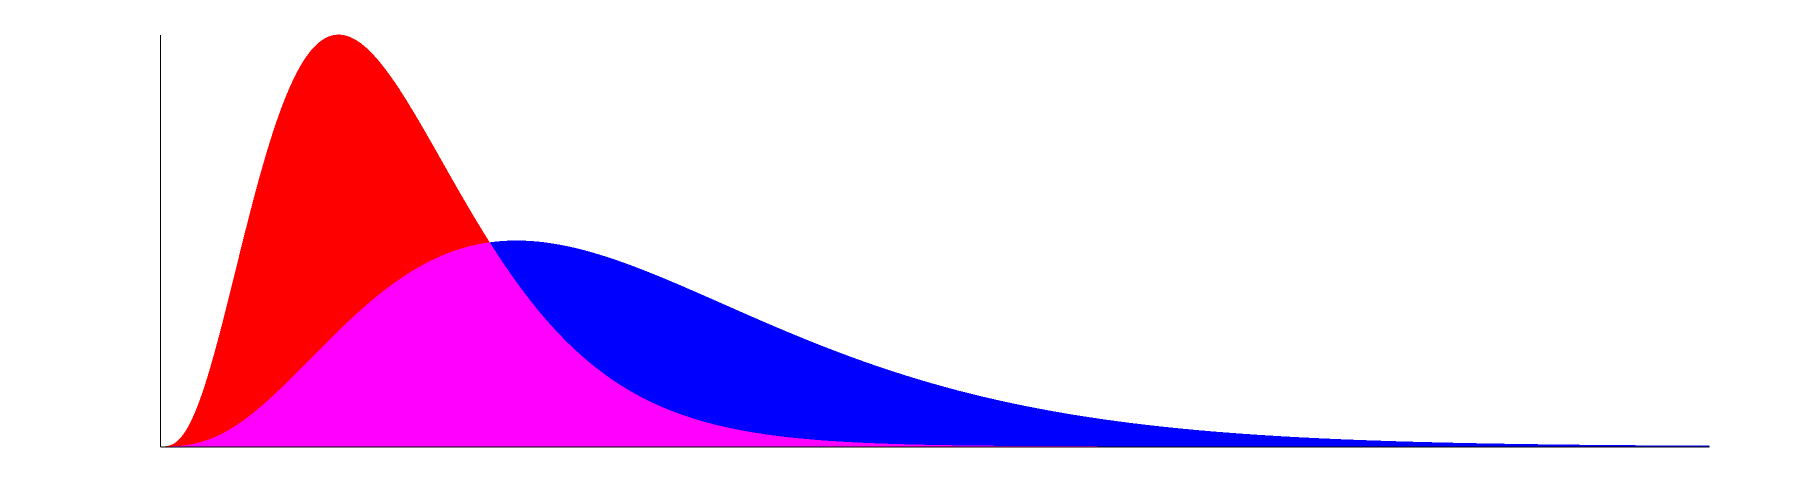 Gamma distributions with (k=4, theta=1) in red, (k=4, theta=2) in blue